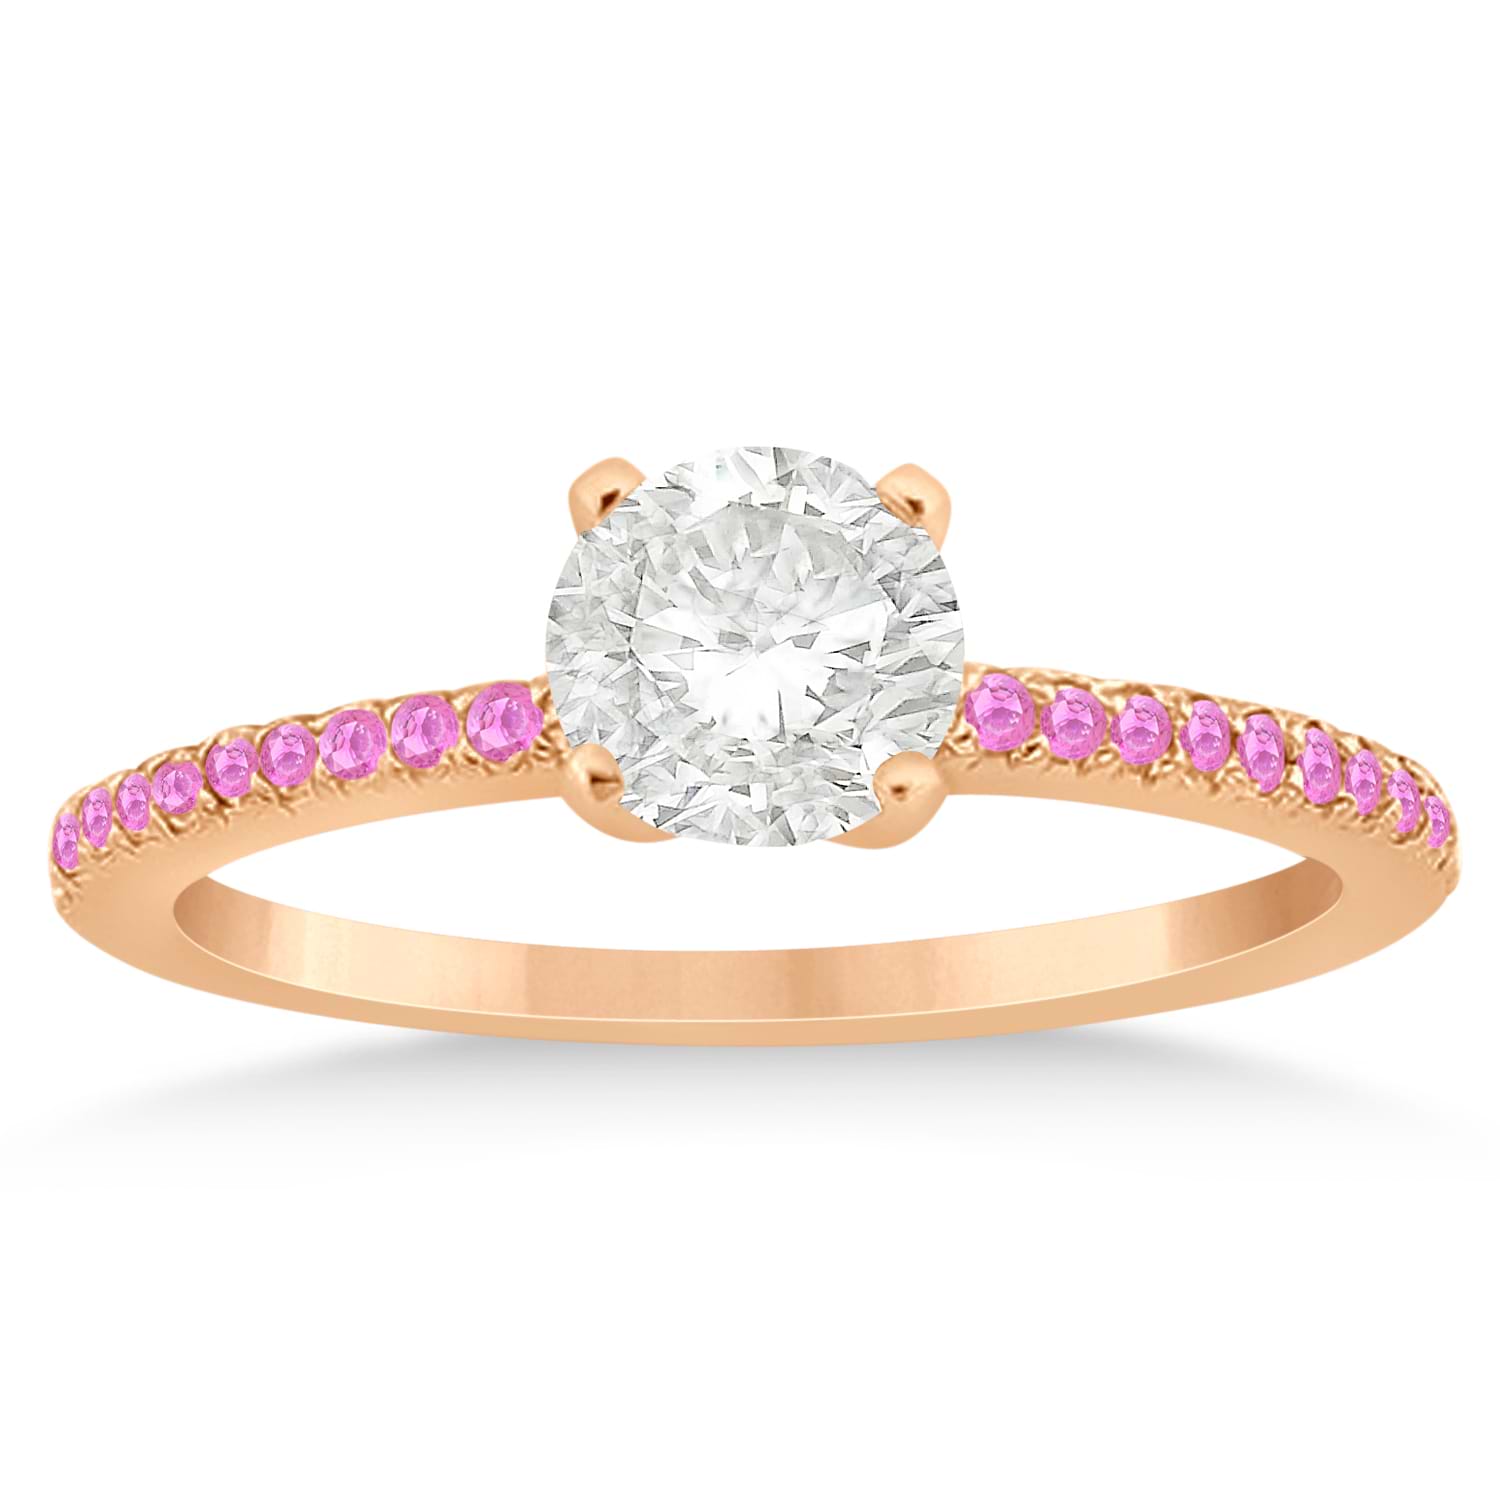 Pink Sapphire Accented Engagement Ring Setting 18k Rose Gold 0.18ct